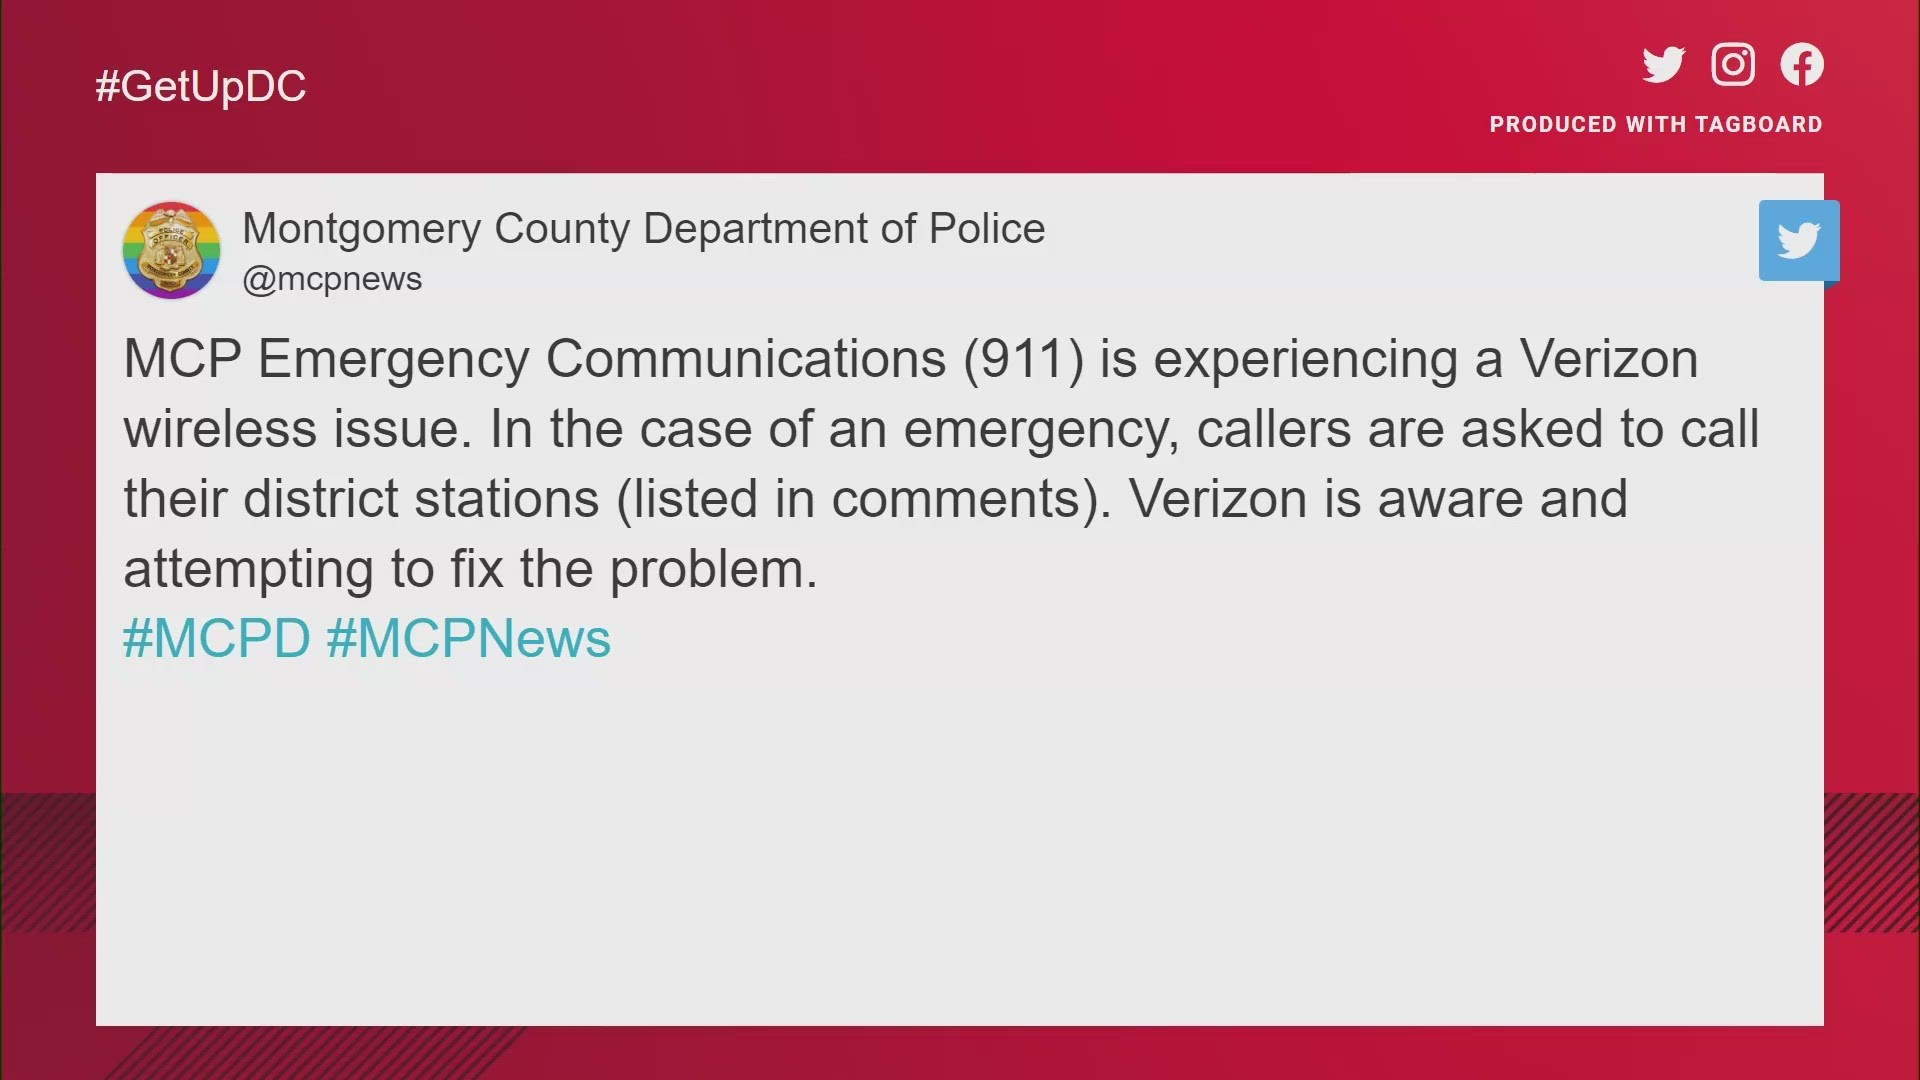 Police say Verizon is aware of the problem and working to fix it.